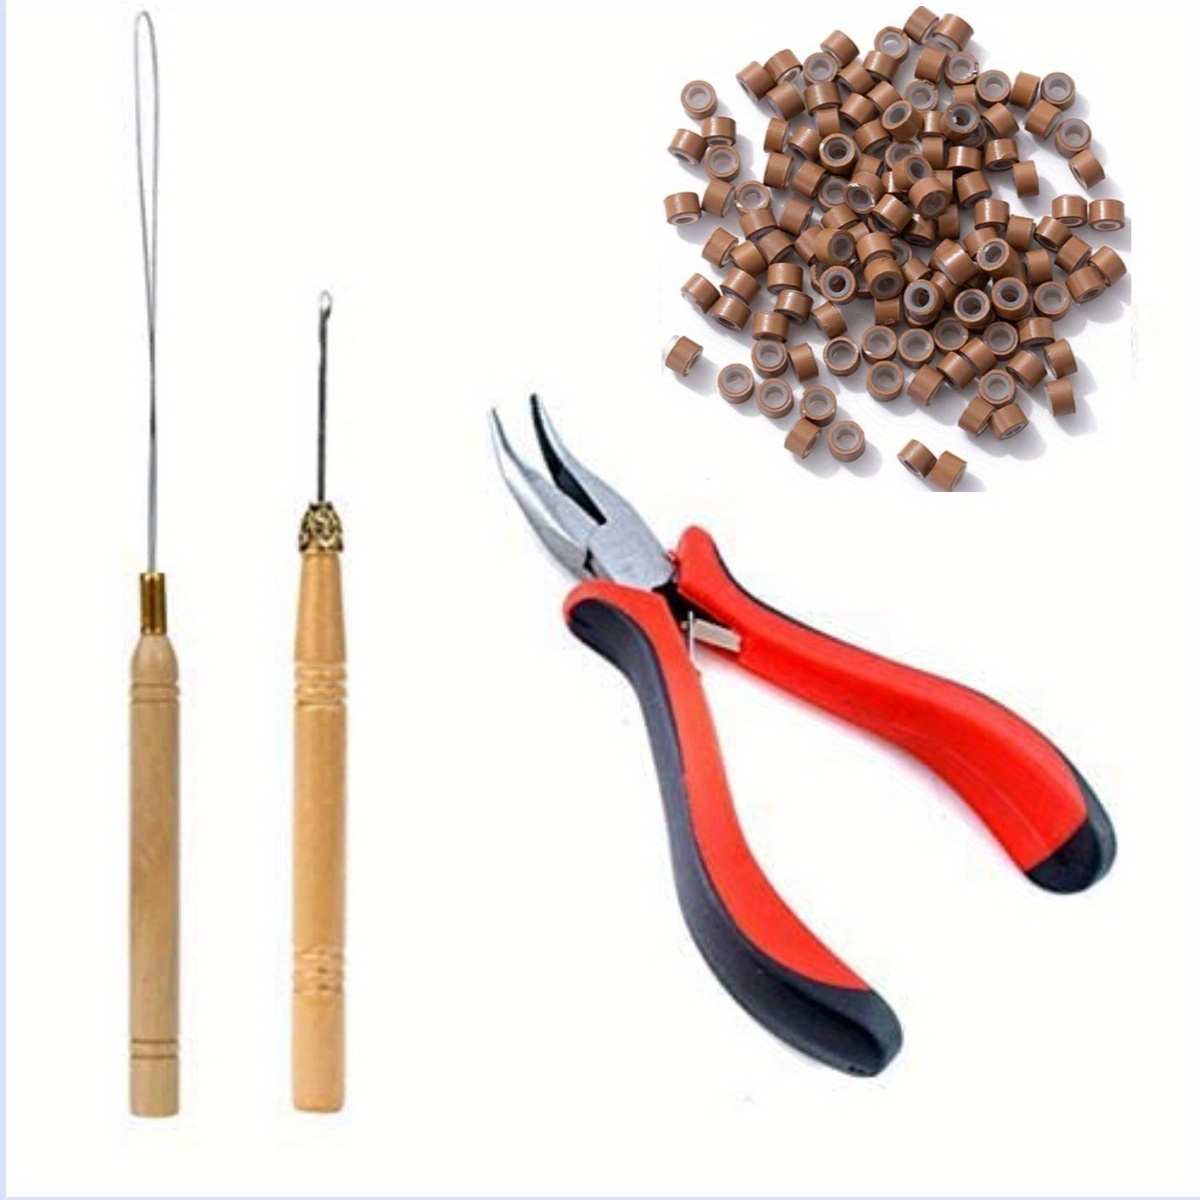 Hair Extension Kit Pliers Pulling Hook Bead Device Tool Kits And 1500  Pieces Silicone Lined Micro Rings (black, Blonde And Brown Beads) - Jxlgv